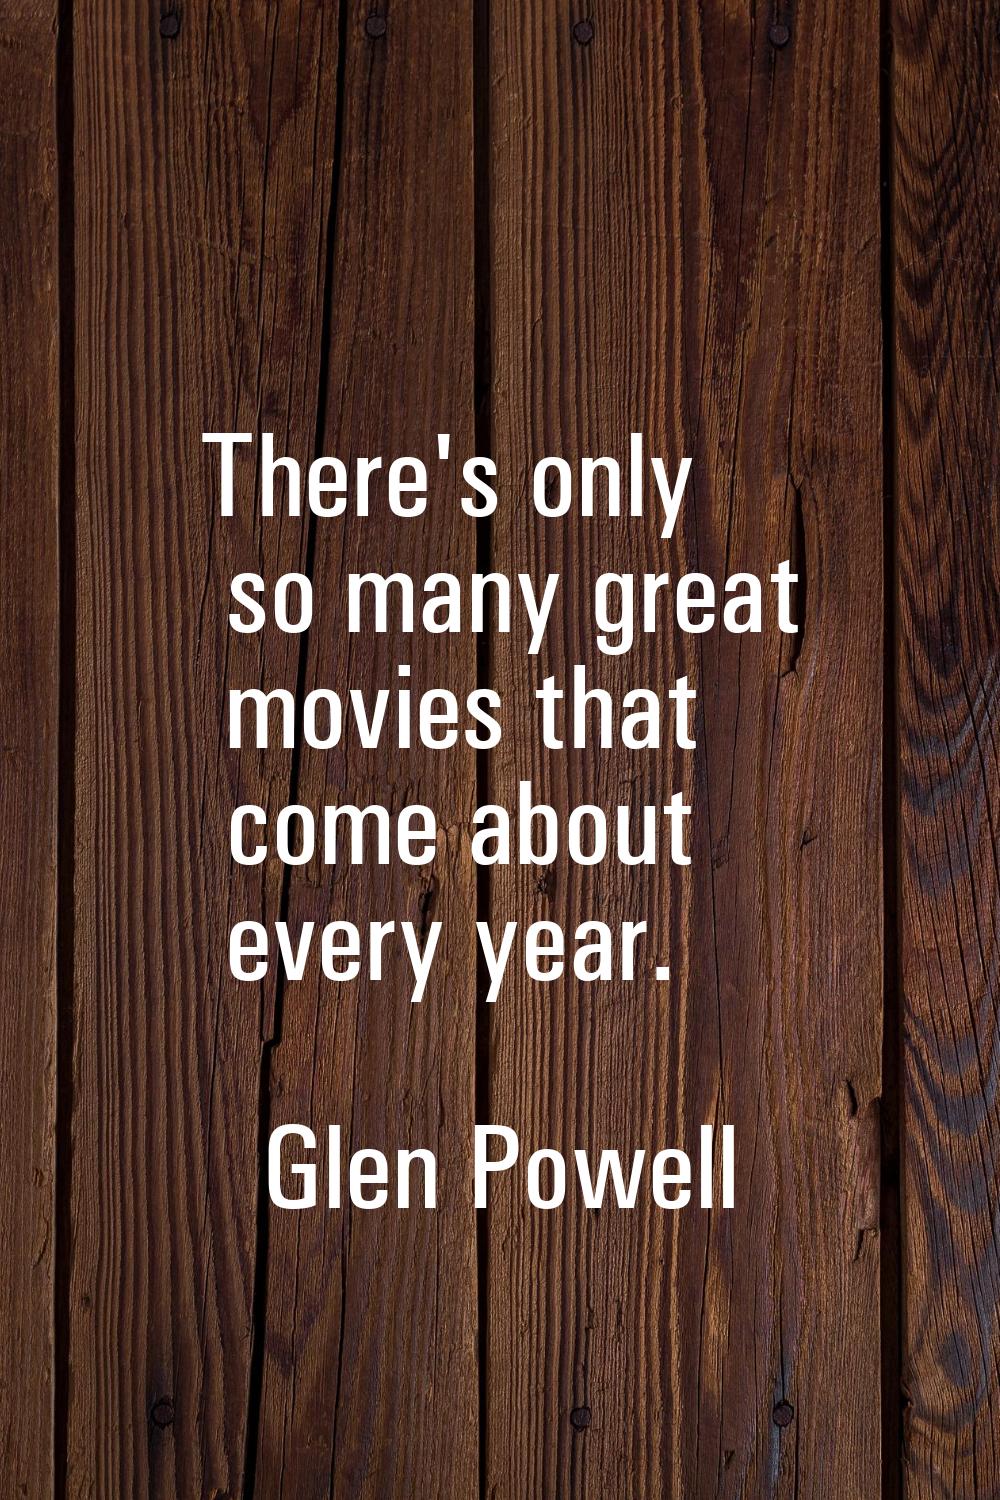 There's only so many great movies that come about every year.